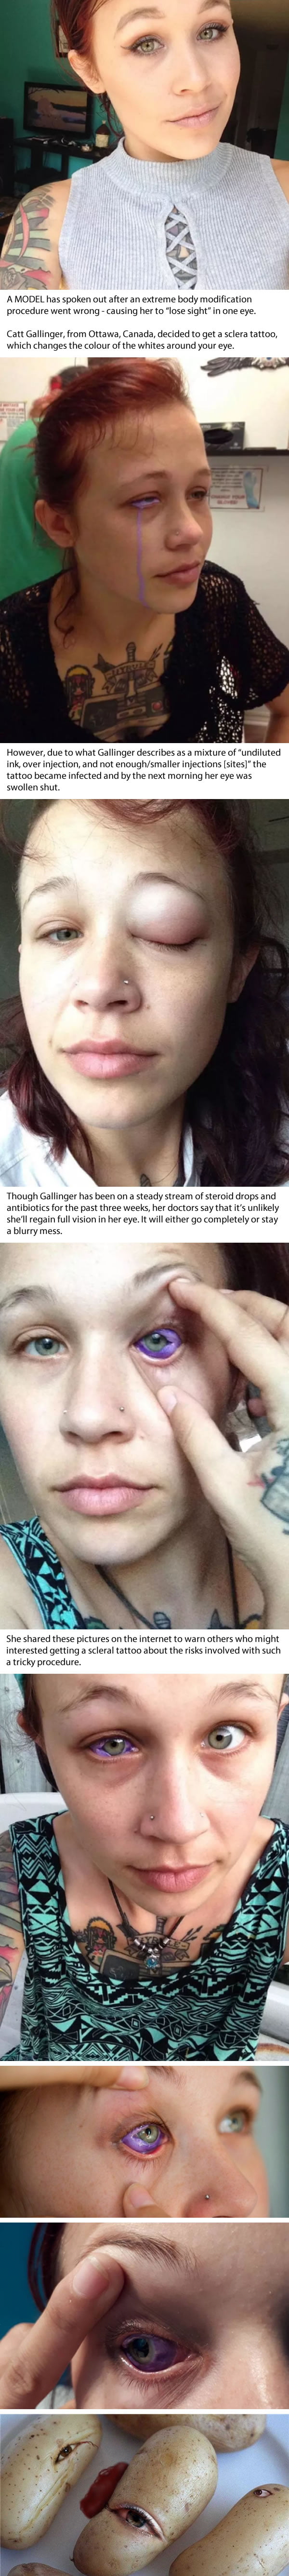 "Botched Eye Tattoo" Leaves This Girl Partially Blind, Now She's Trying To Warn Others